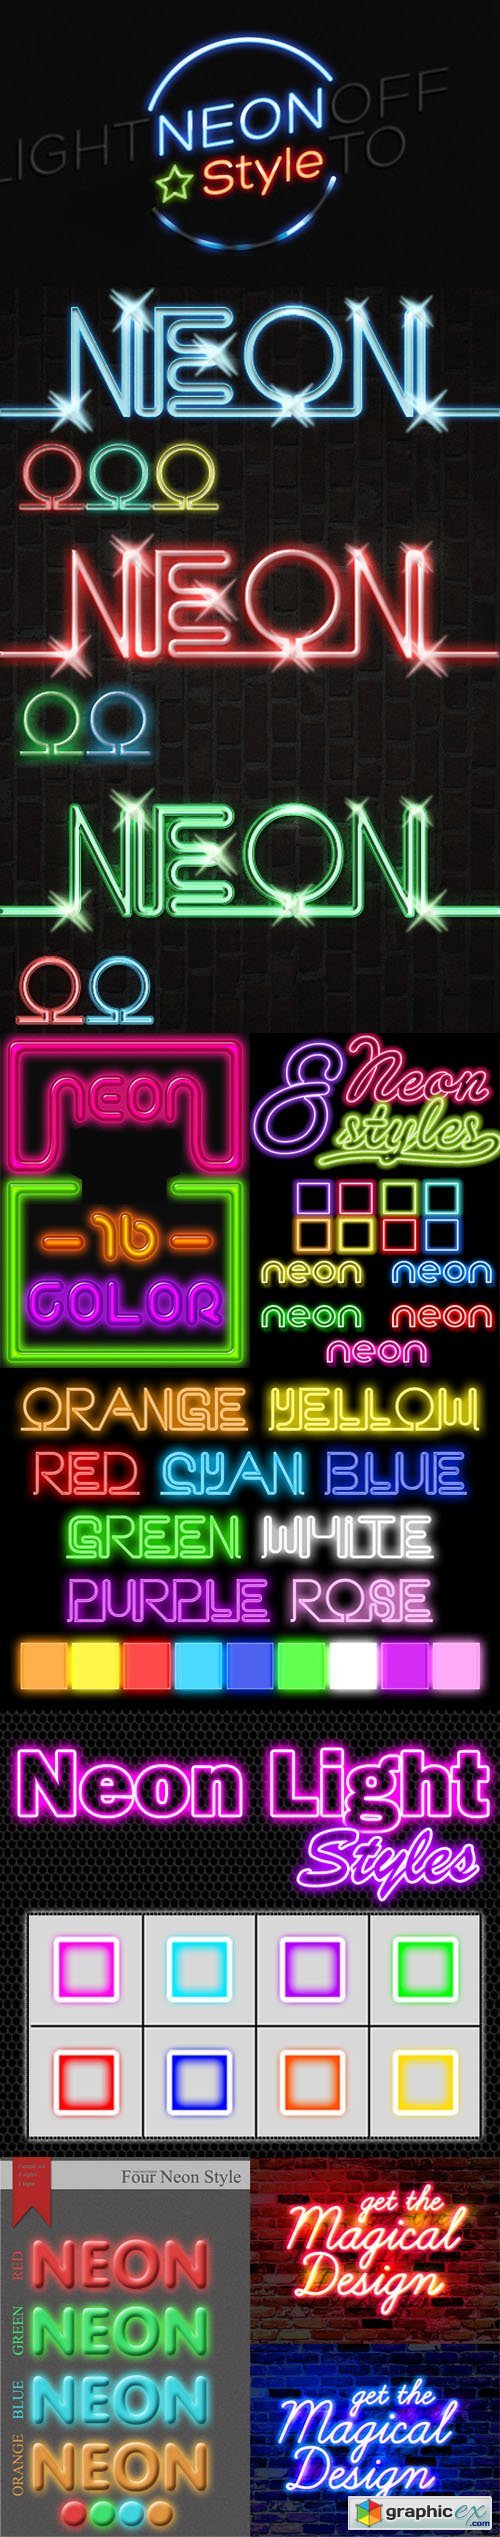 Neon Ligth Styles for Photoshop